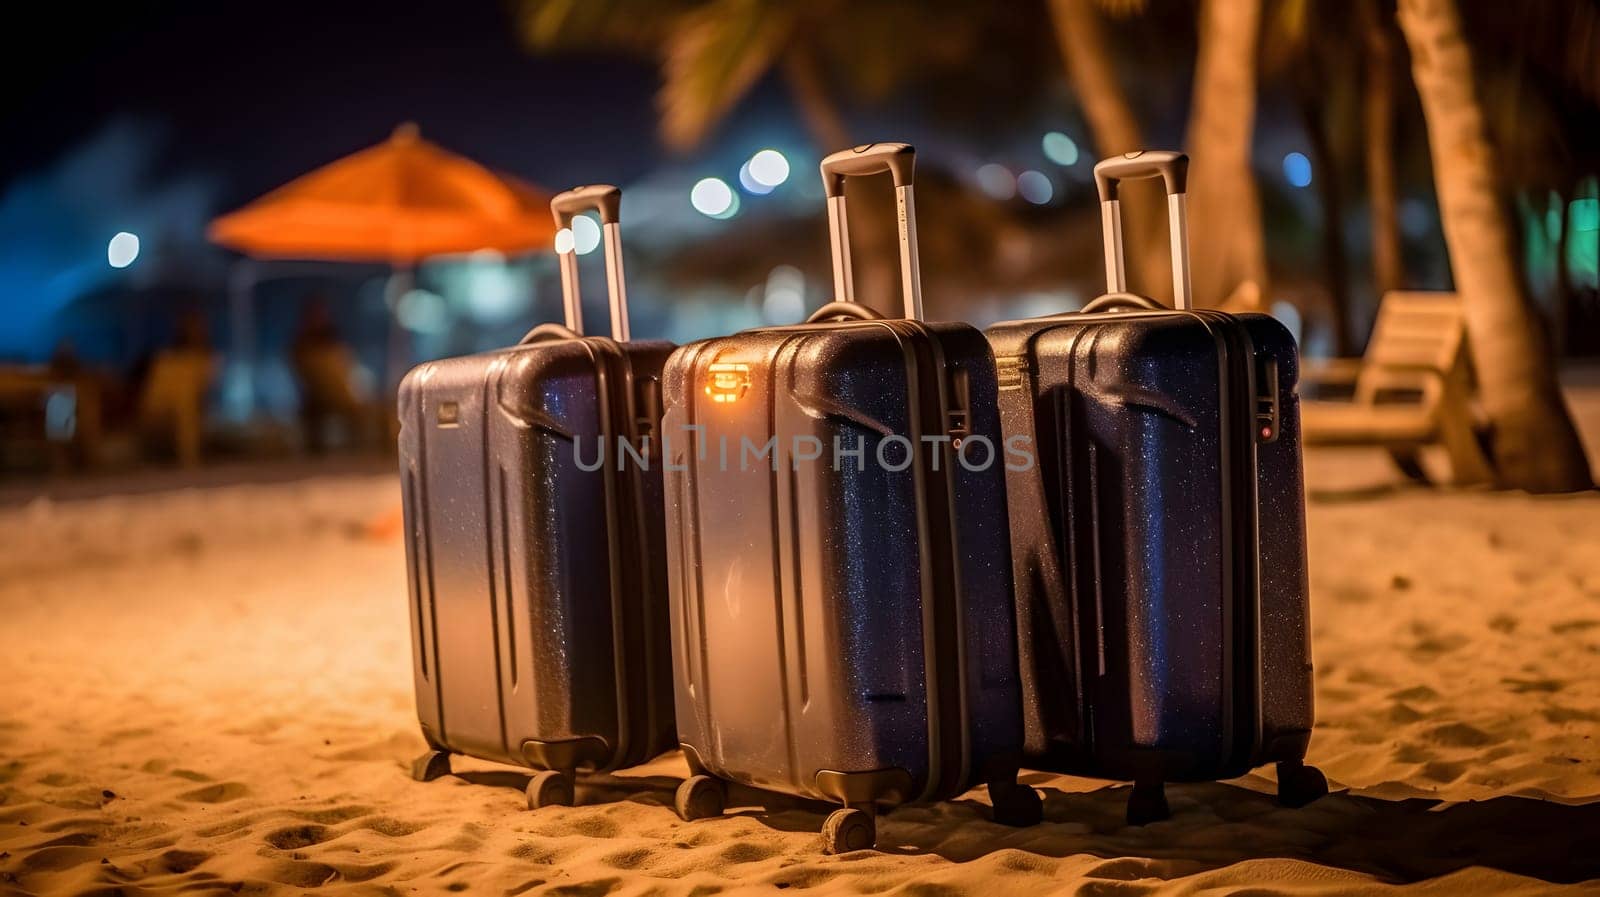 Few modern suitcases on tropical resort beach at night. Neural network generated in May 2023. Not based on any actual person, scene or pattern.